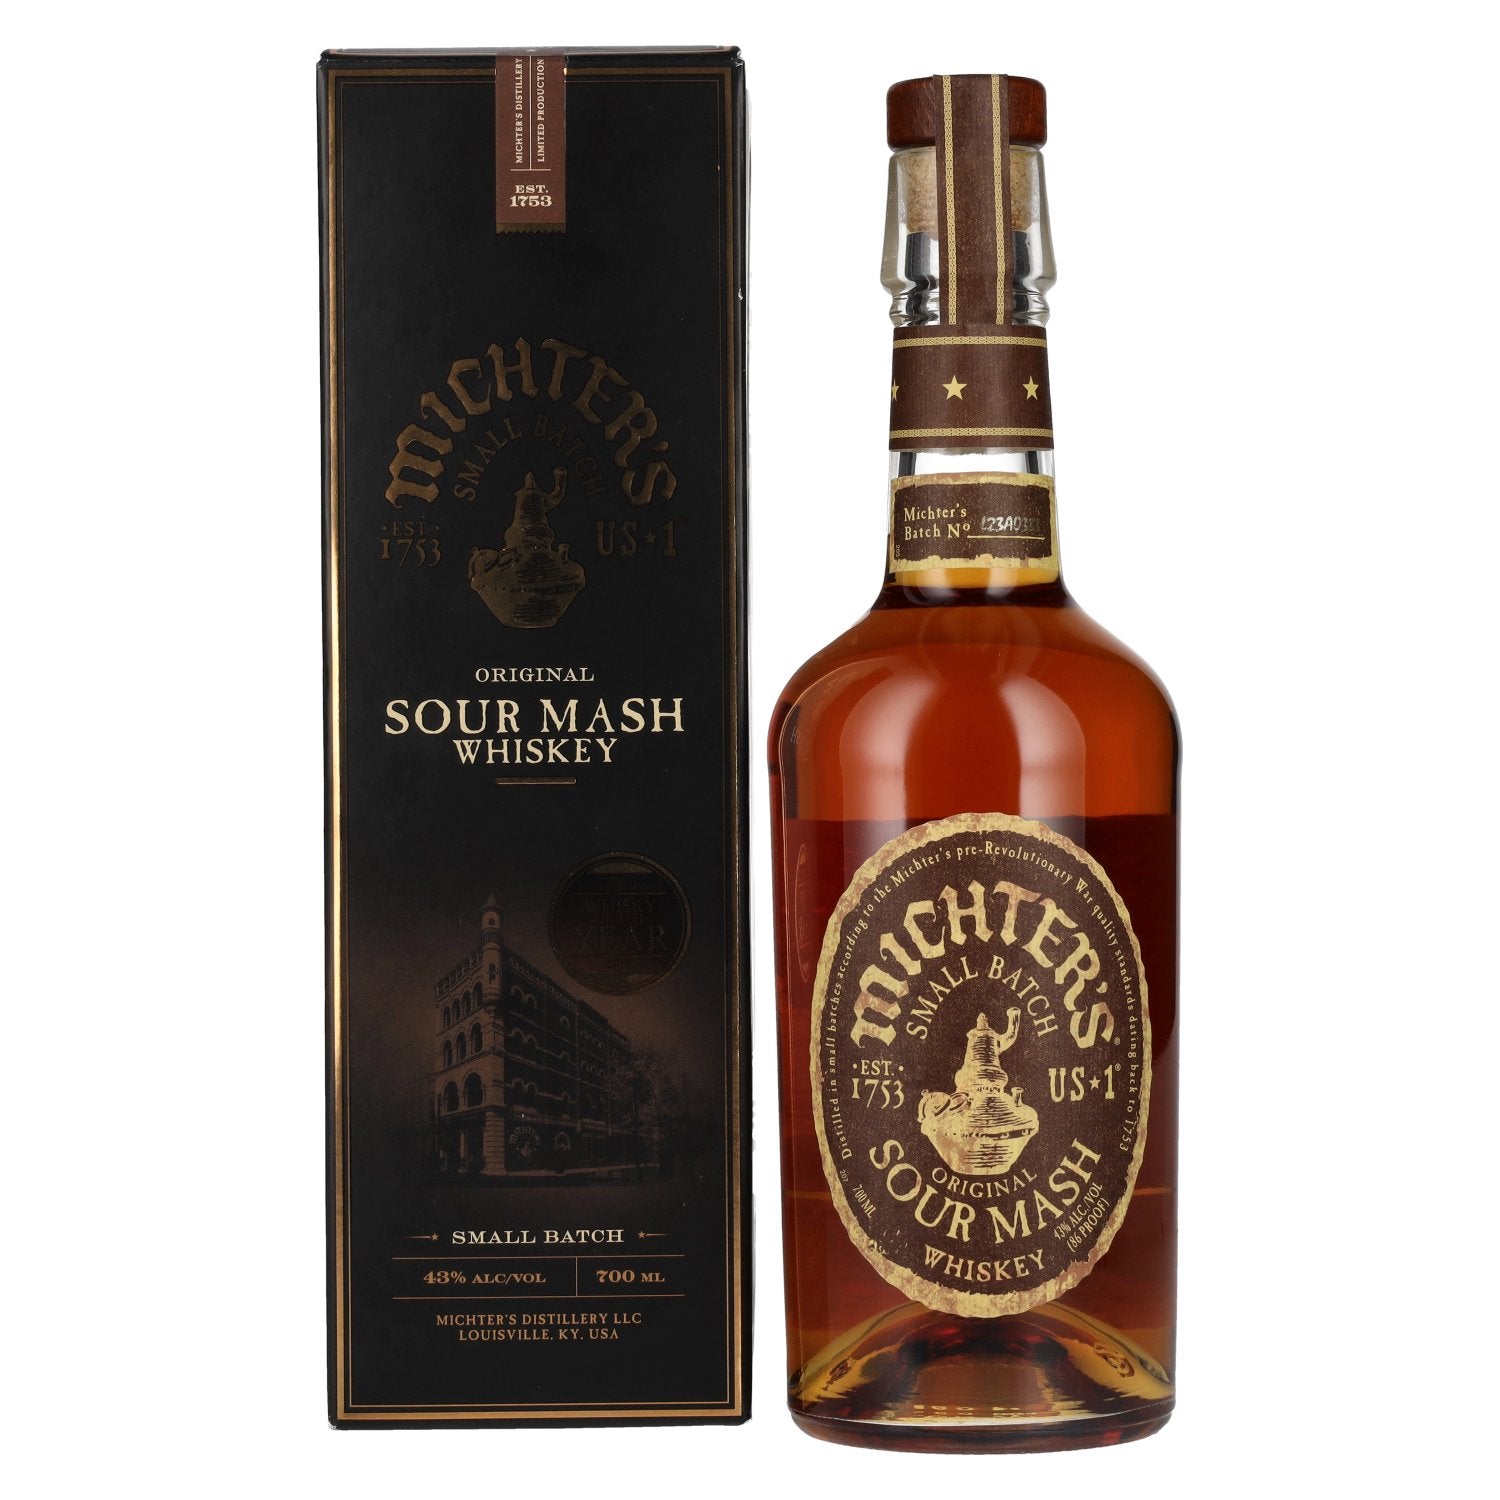 Michter's US*1 Small Batch Original Sour Mash Whiskey 43% Vol. 0,7l in Giftbox